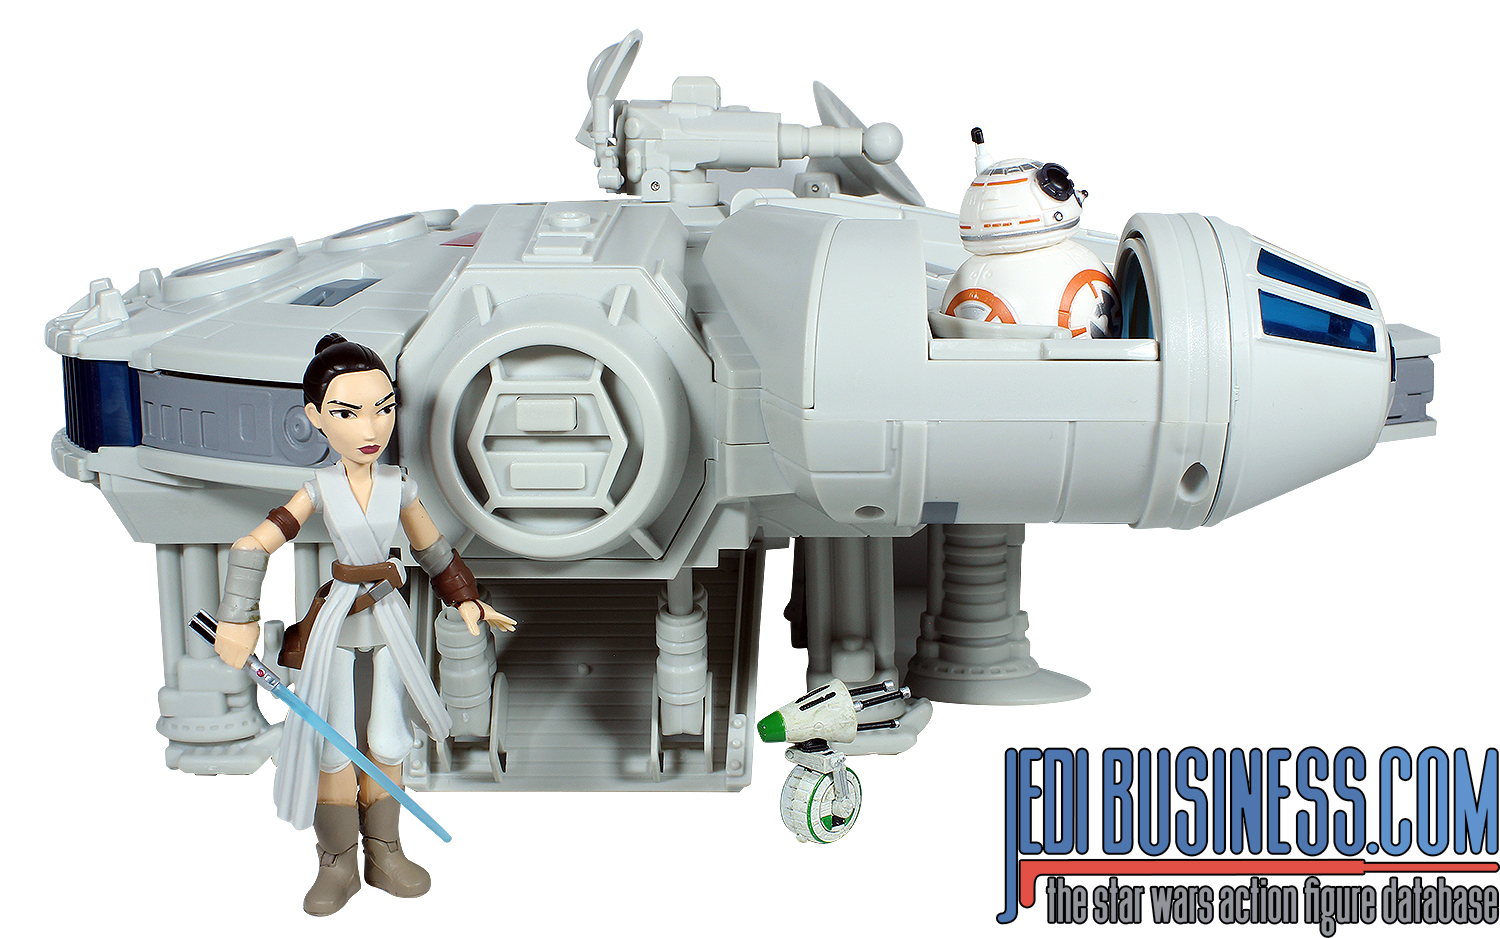 Rey With BB-8, D-0 And Millennium Falcon